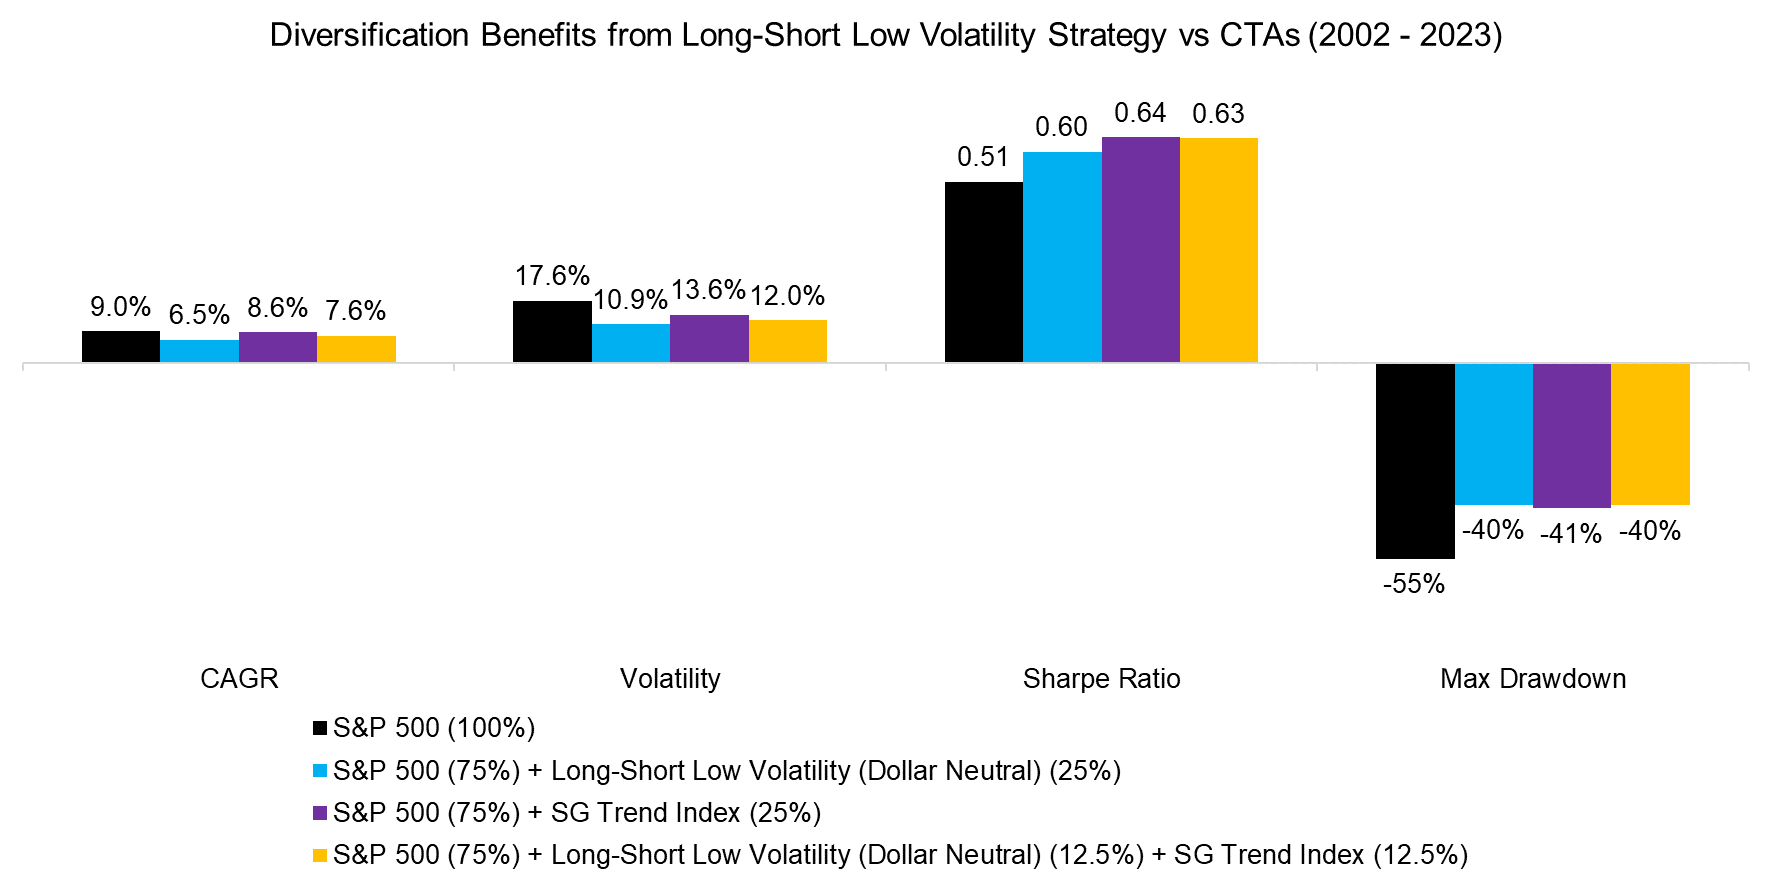 Diversification Benefits from Long-Short Low Volatility Strategy vs CTAs (2002 - 20